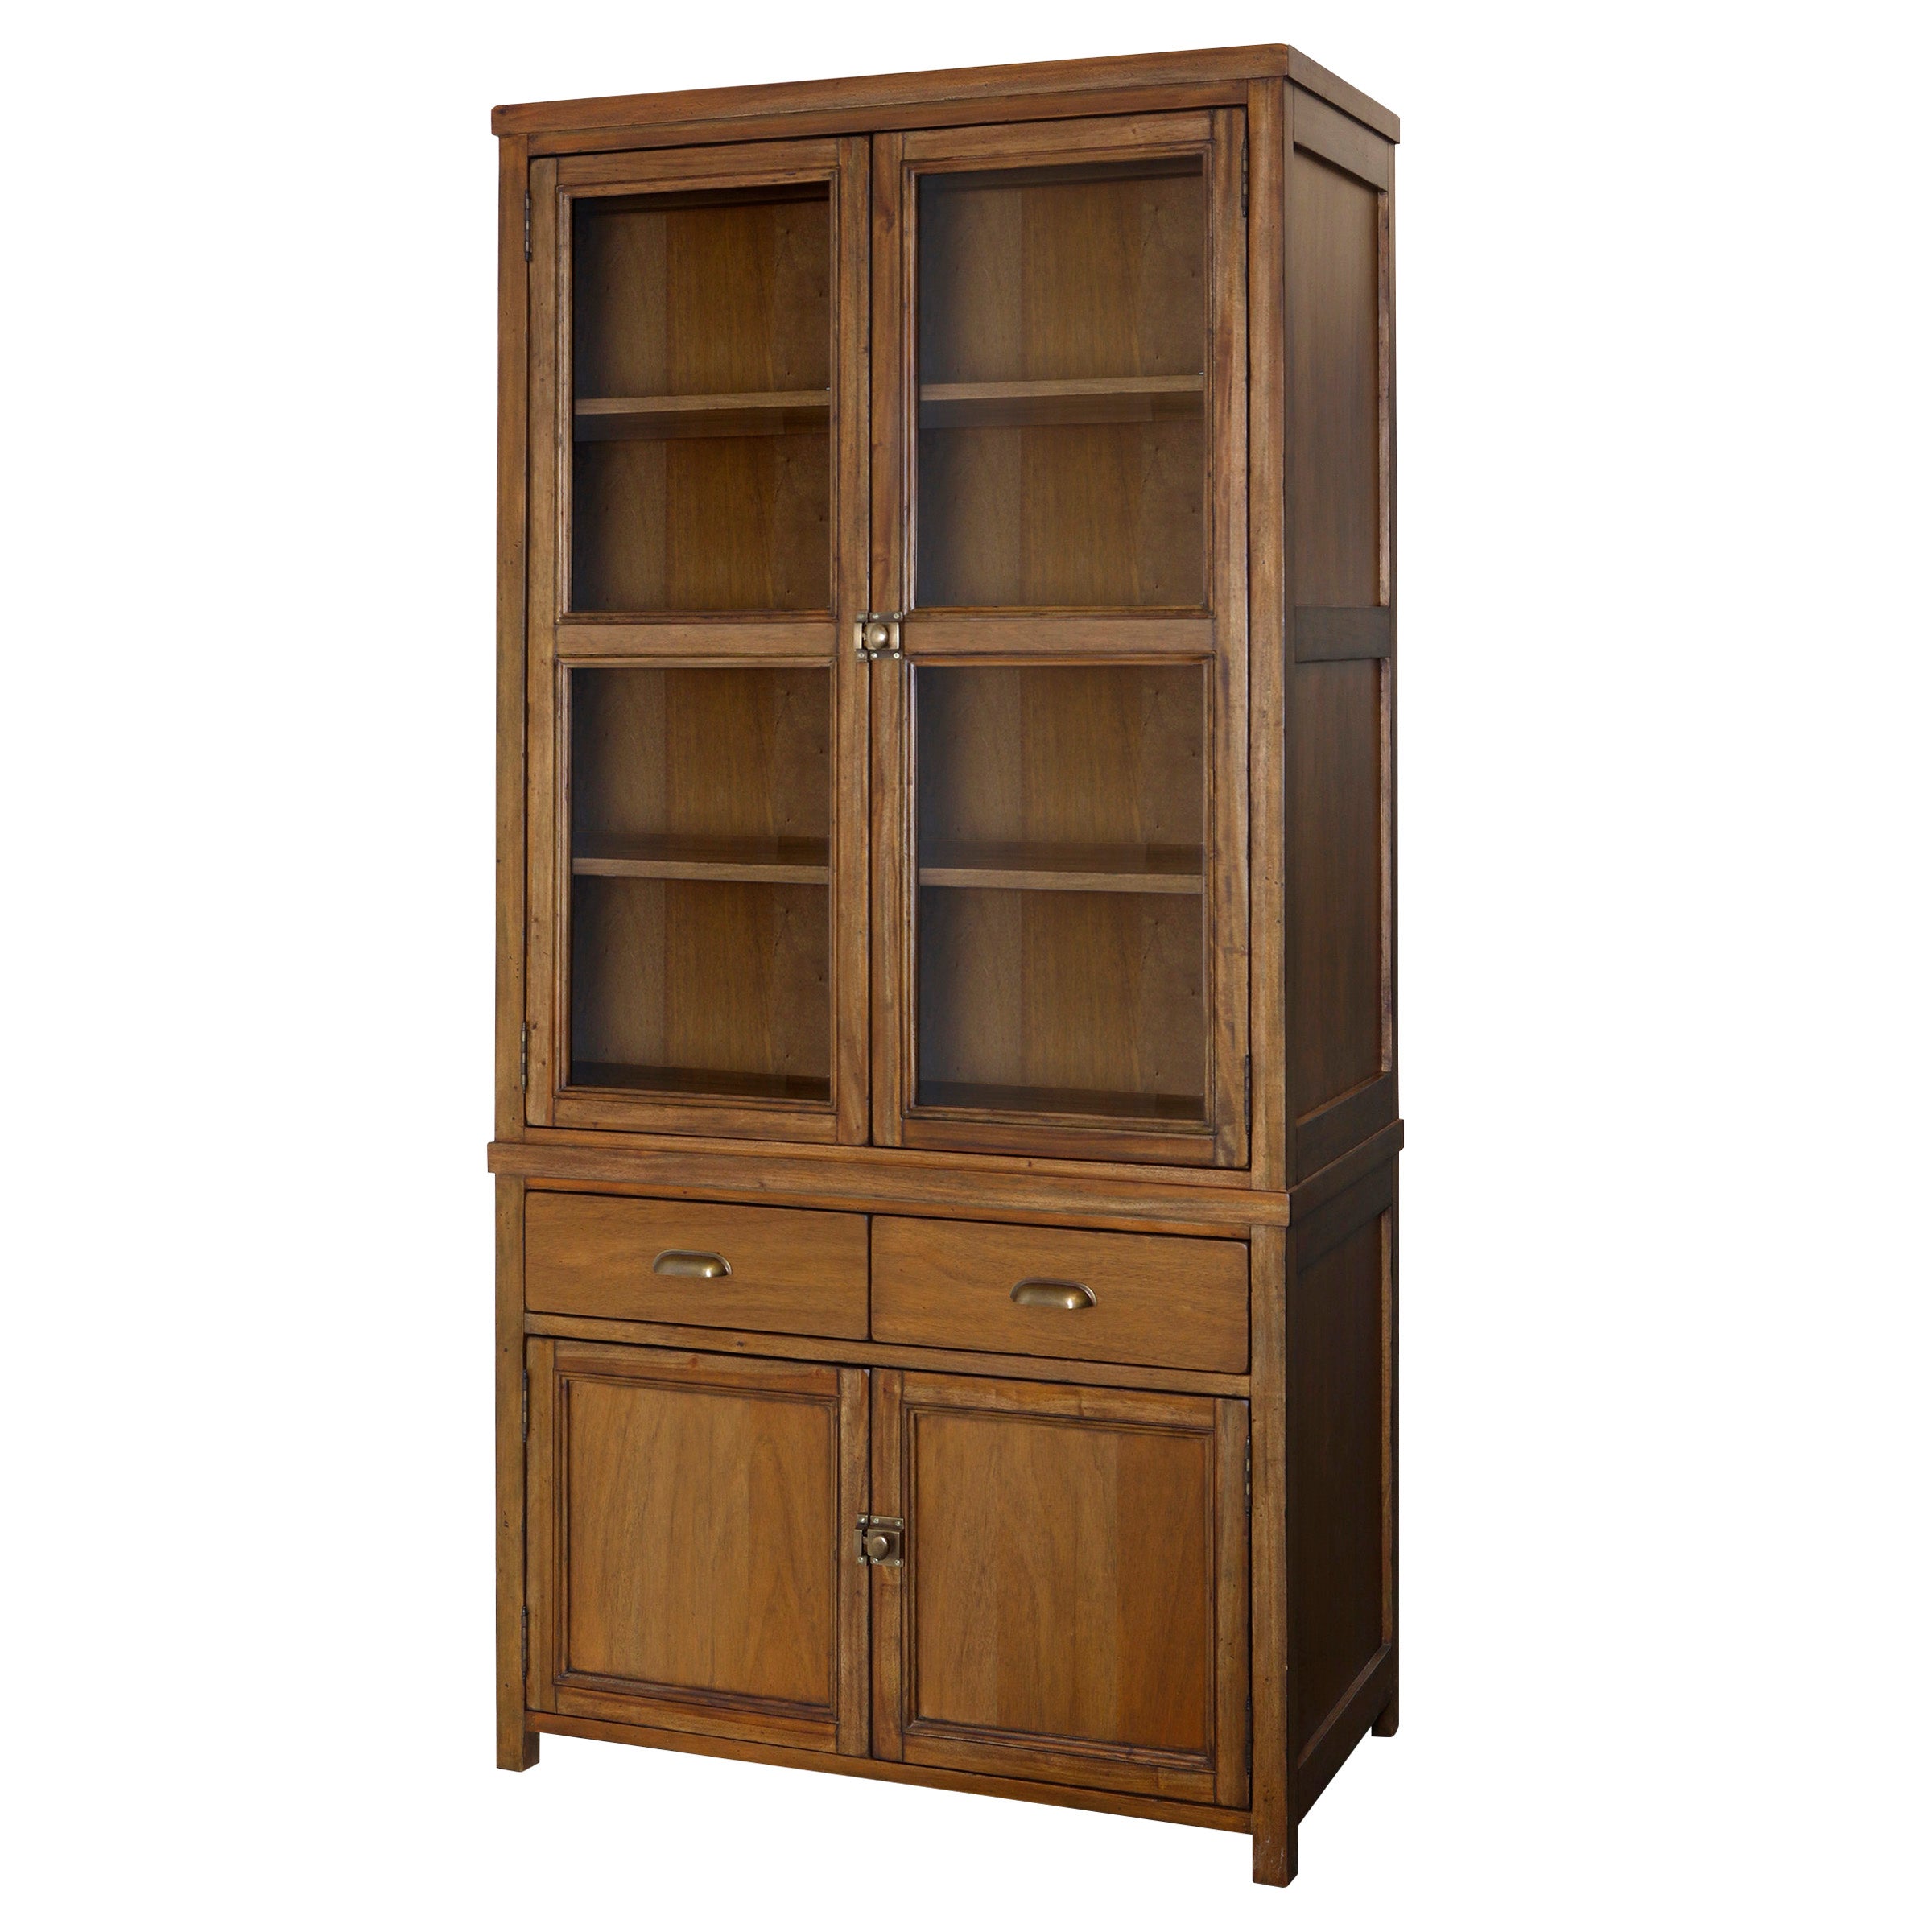 Hammond Cabinet On sale for $1999.20, discounted from $2499.00